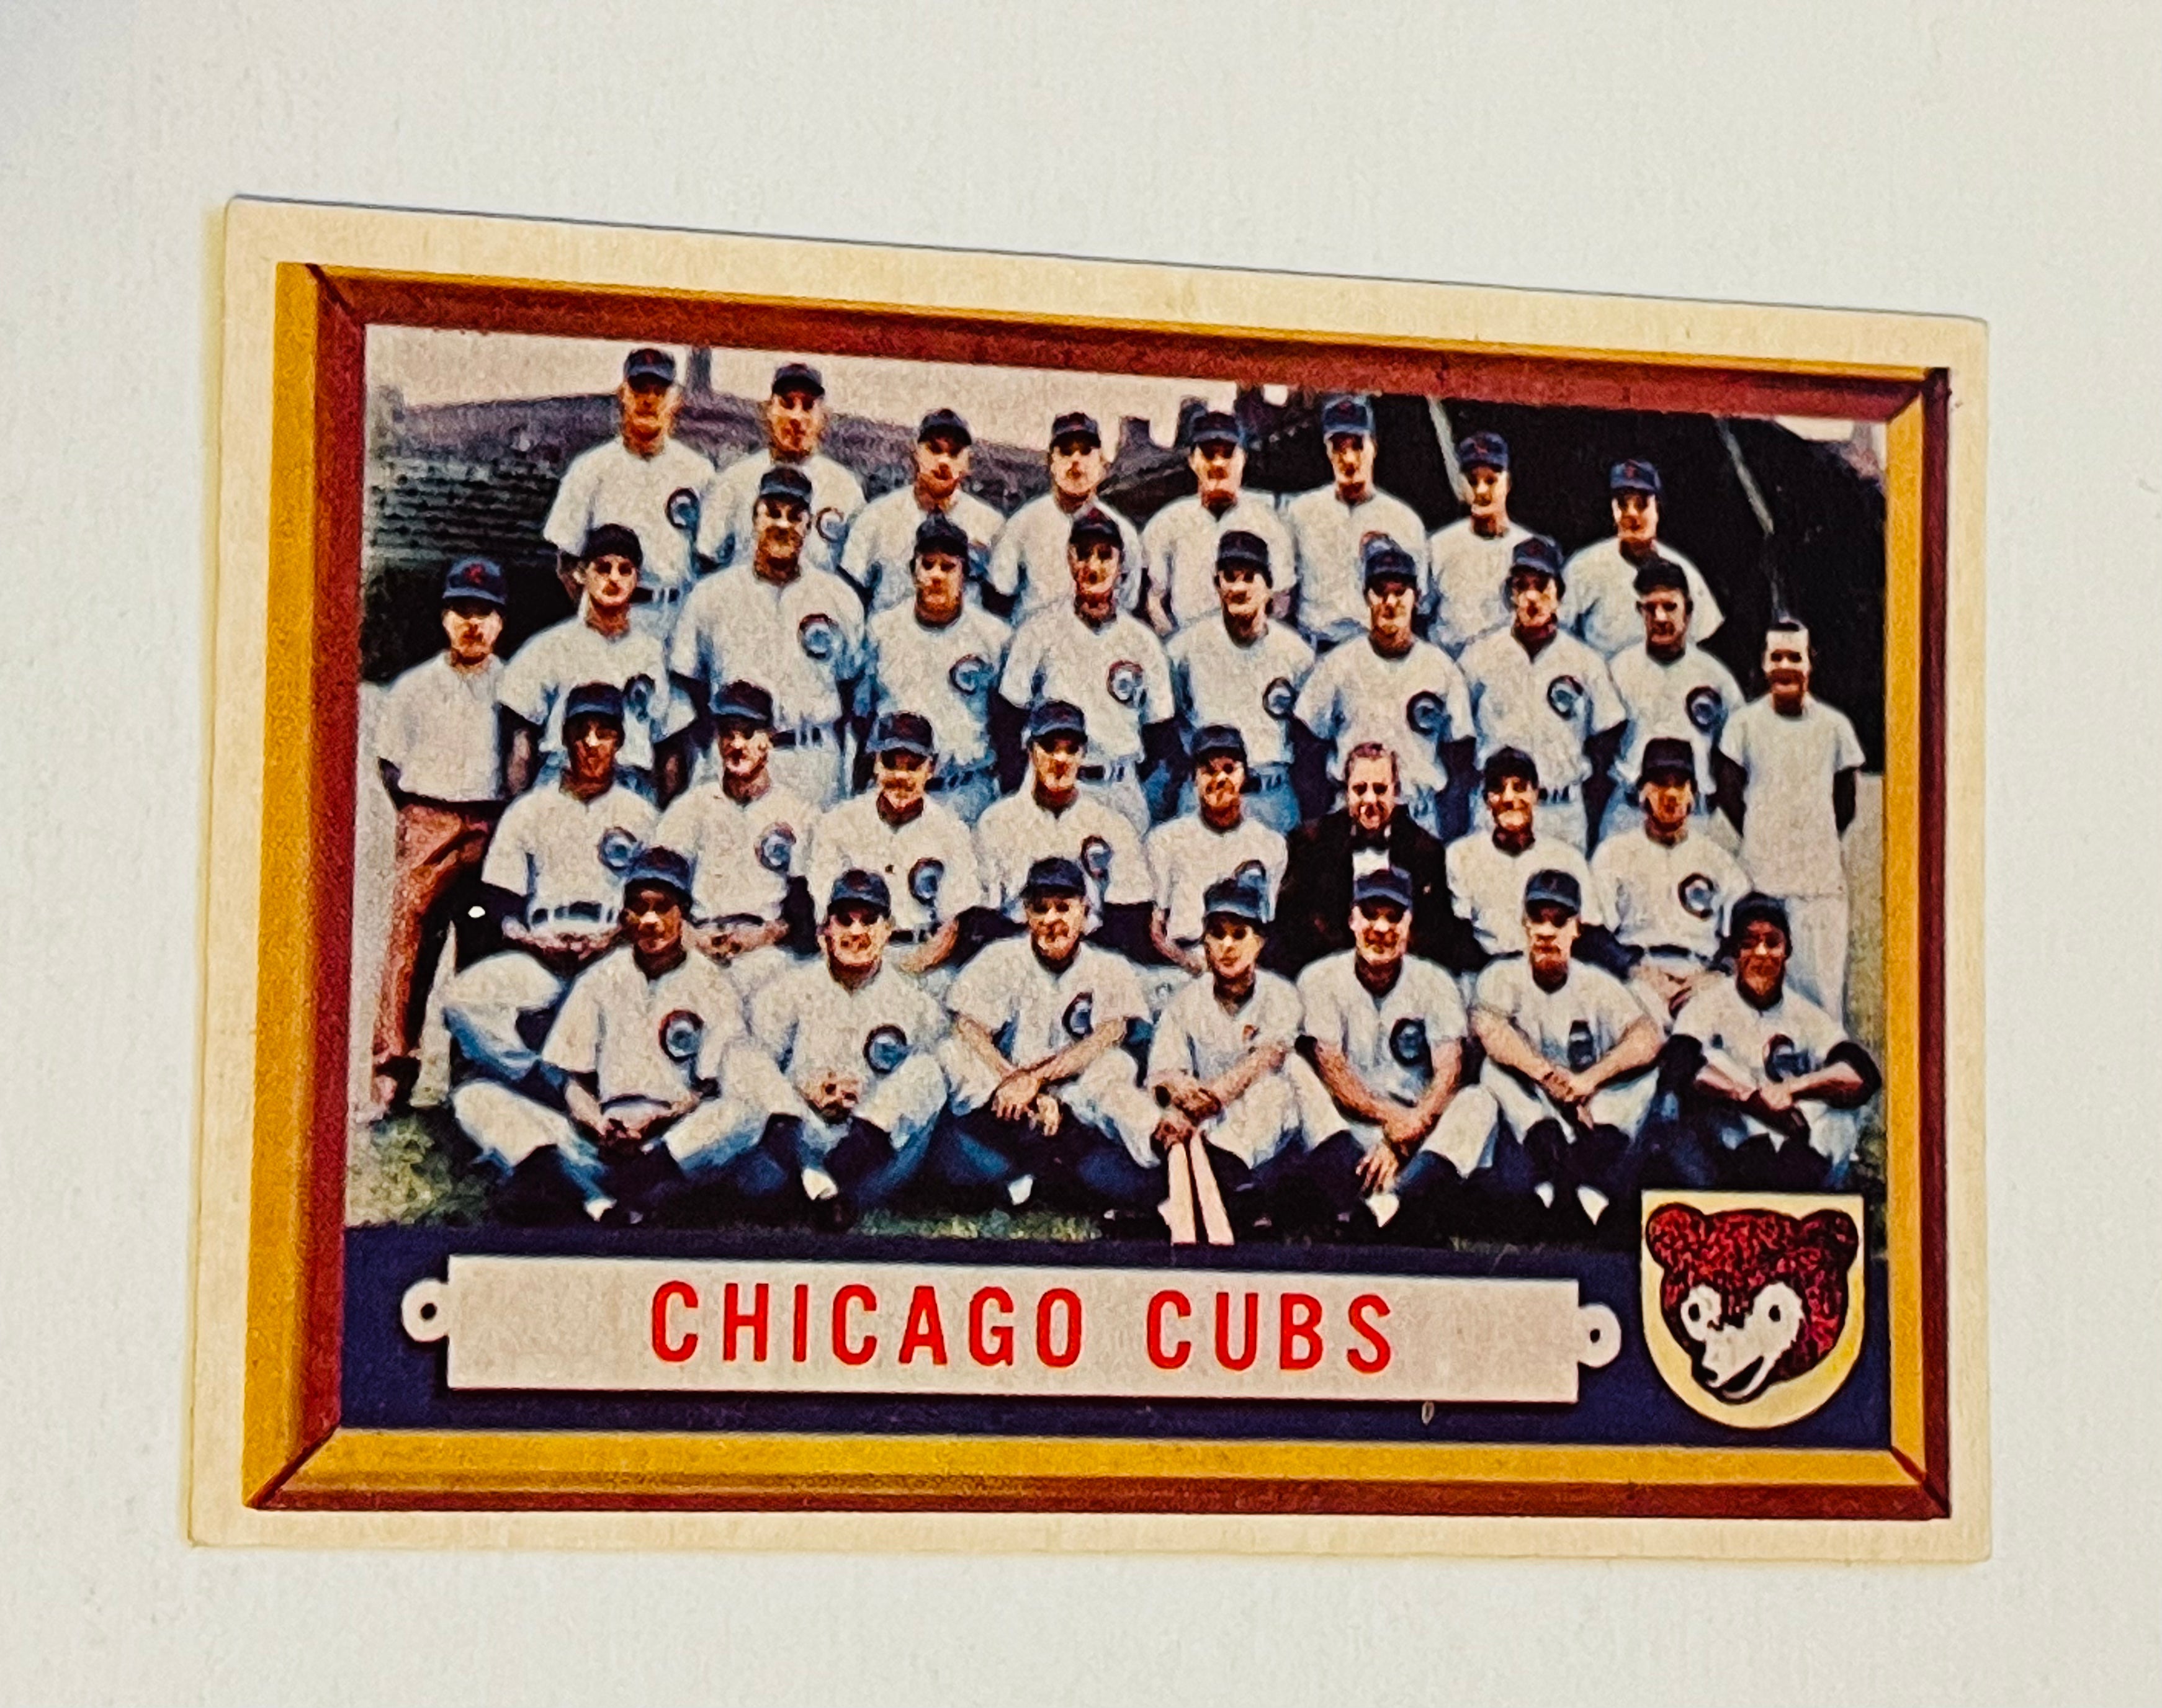 1957 Topps baseball Chicago Cubs NM condition card